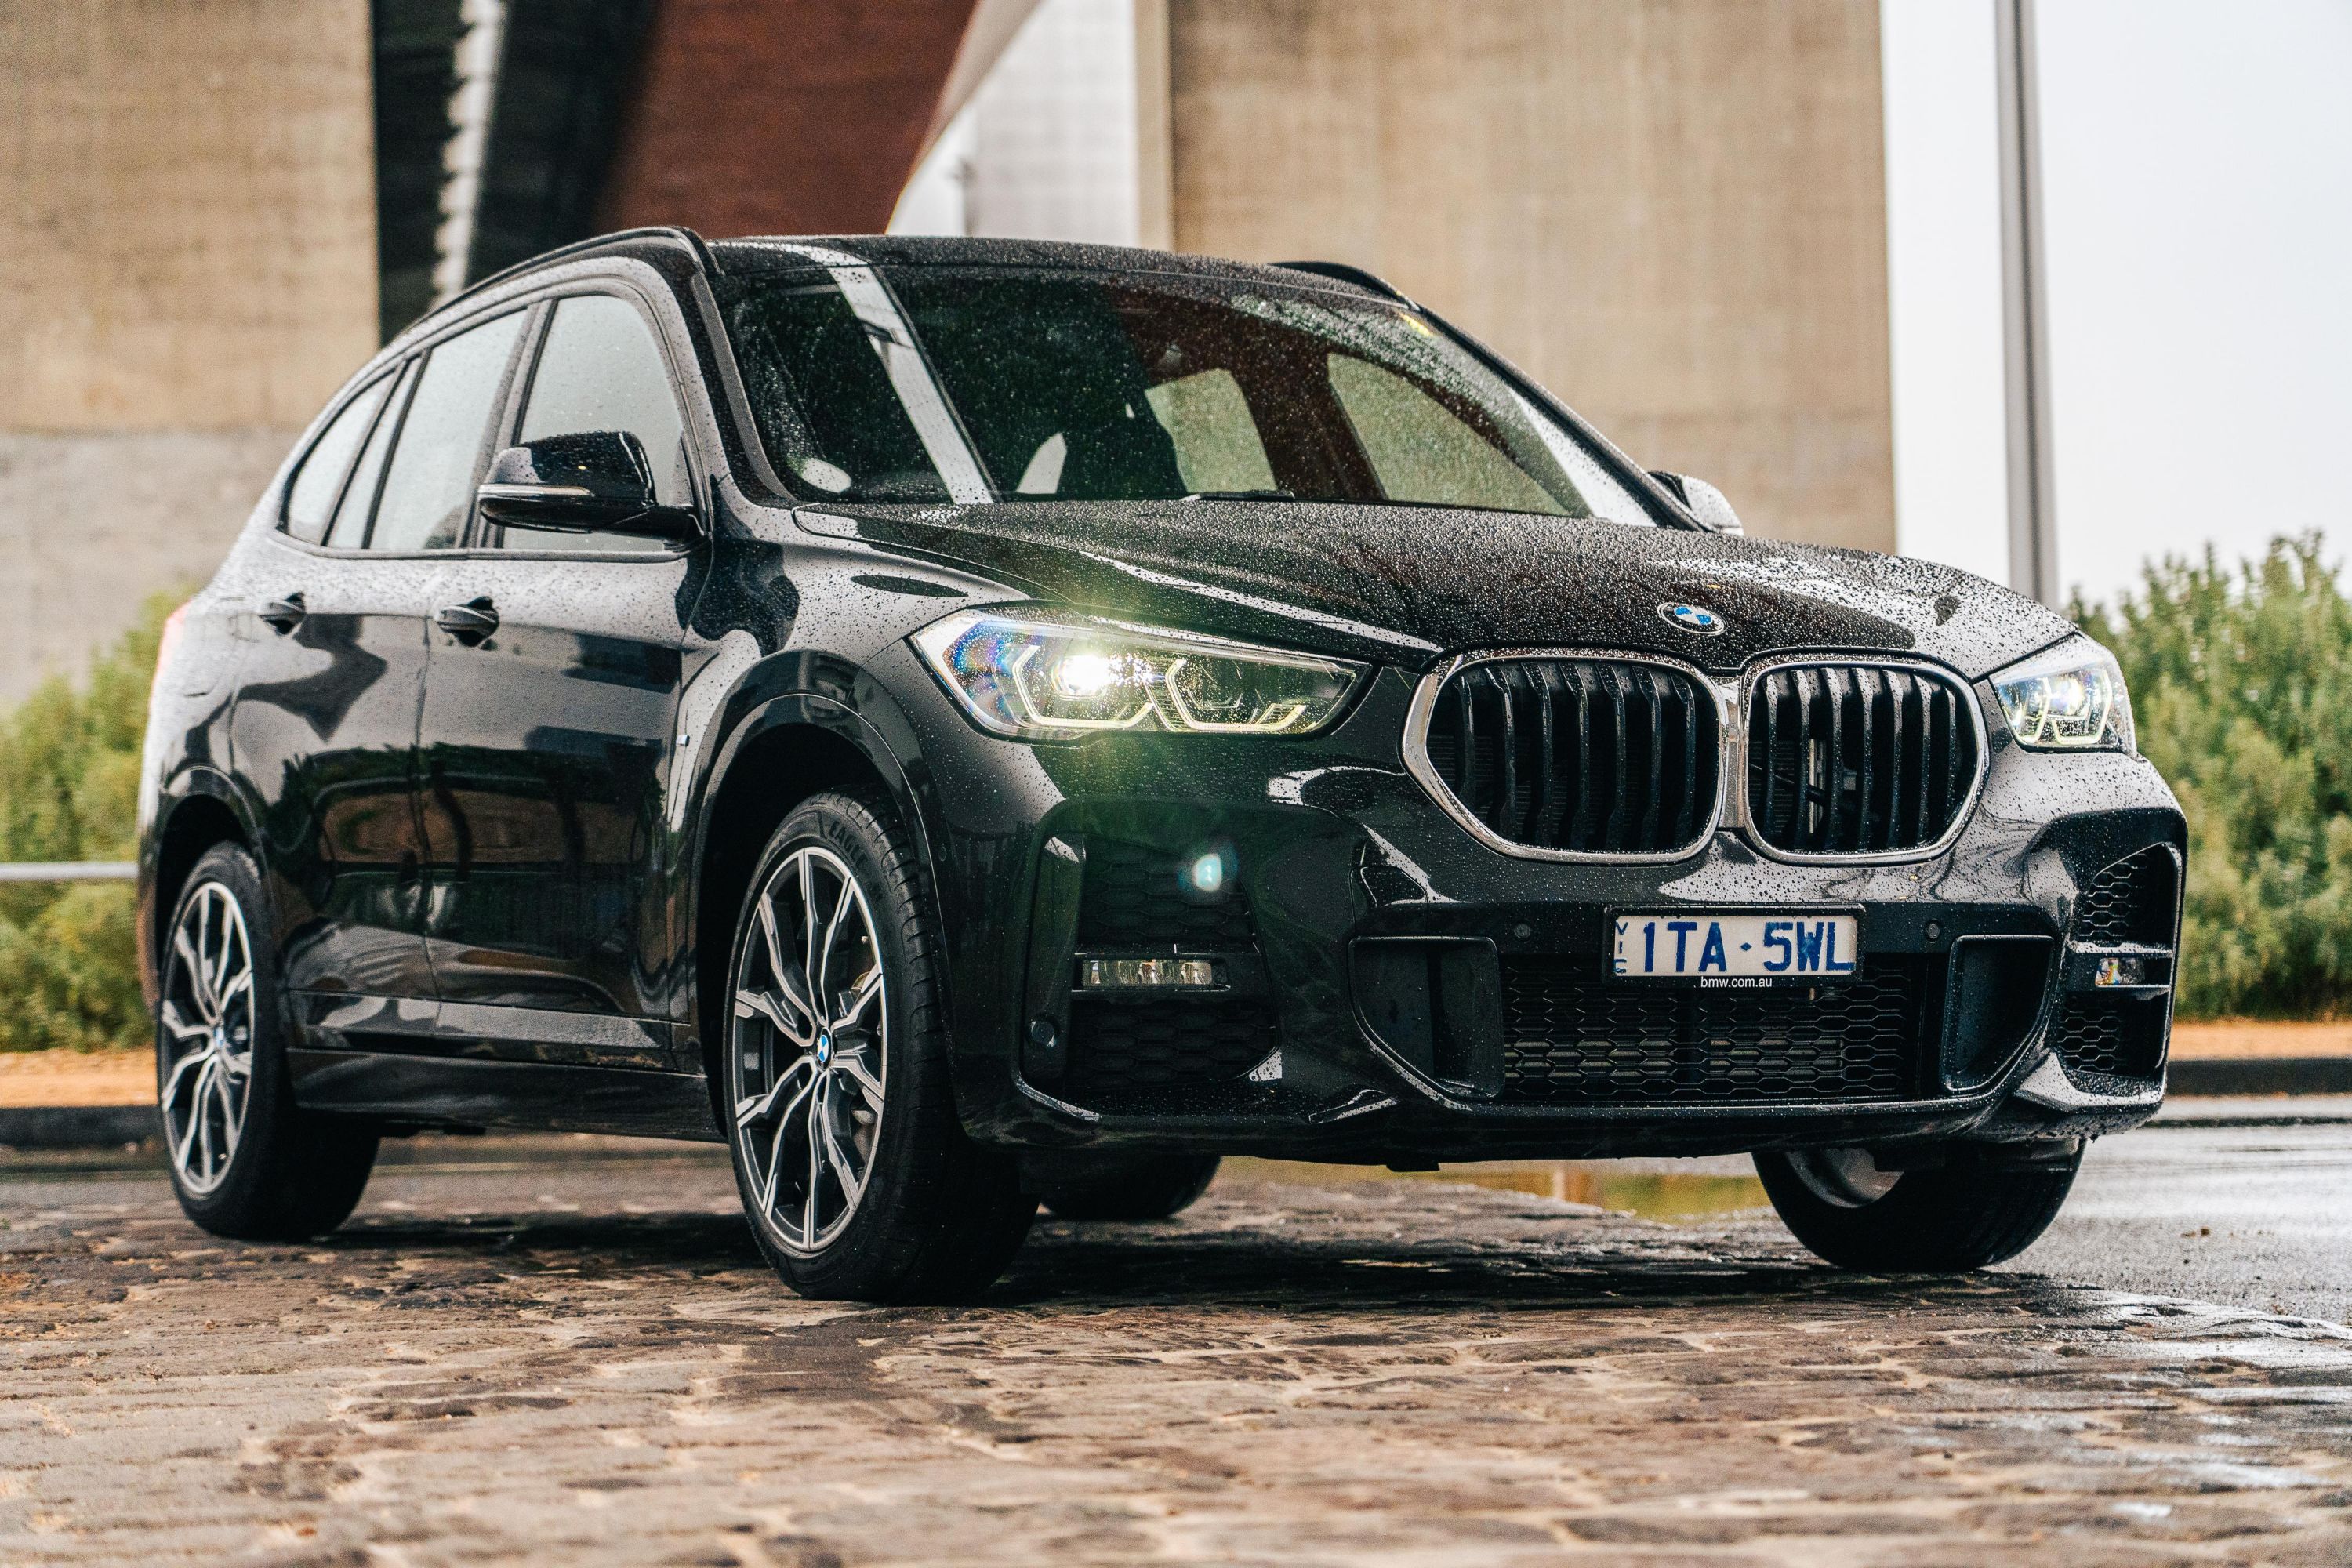 We're Driving The EU-Spec 3-Cylinder BMW X1, What Would You Like To Know?